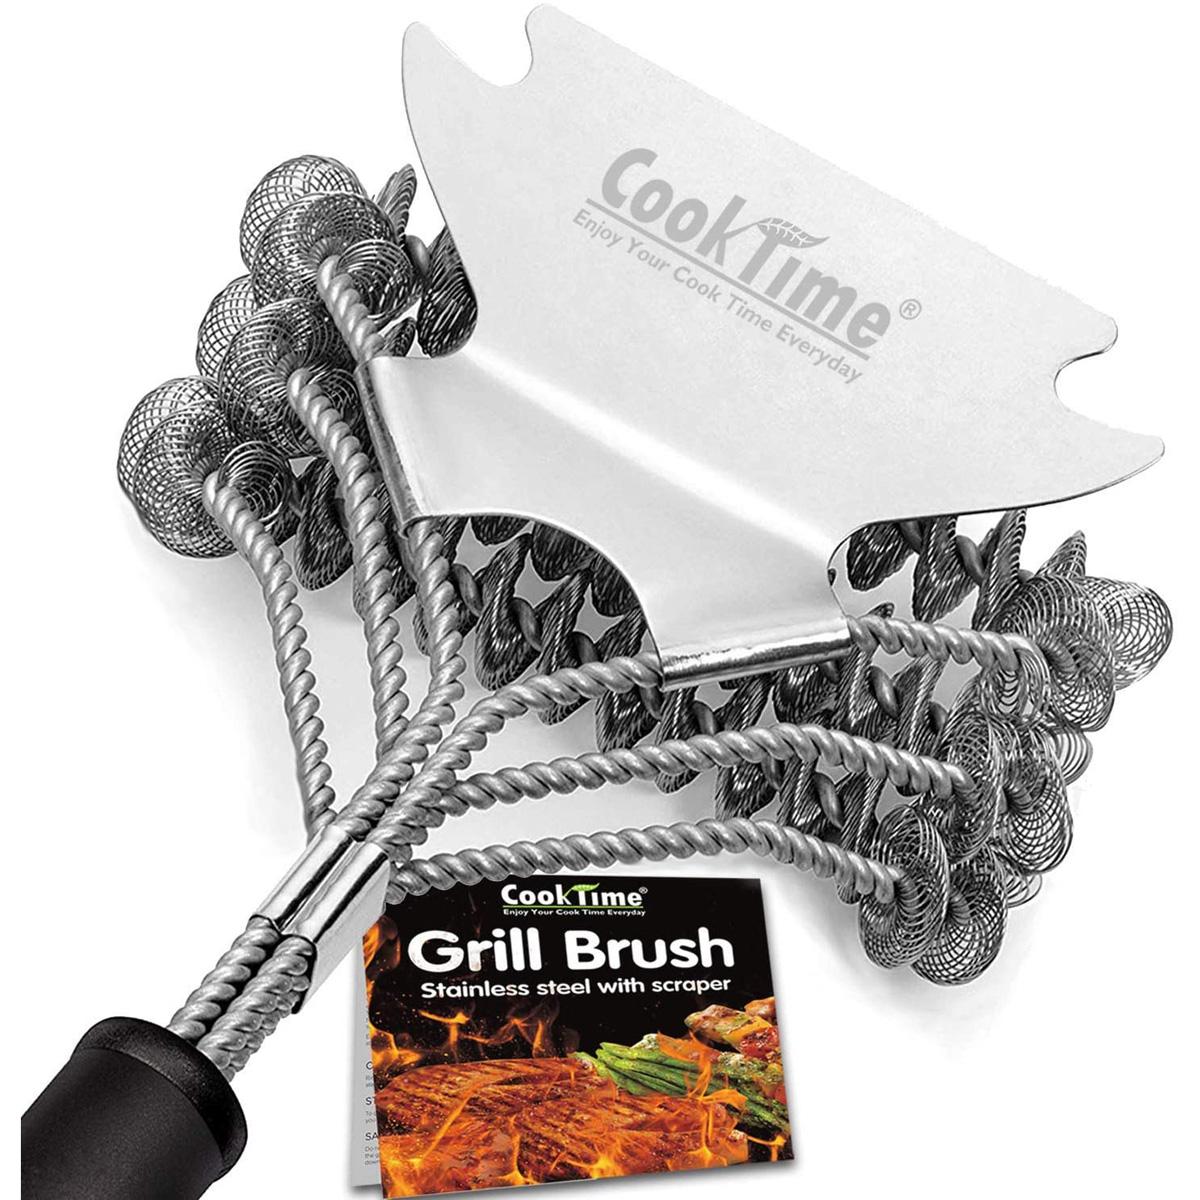 18ft Cook Time Stainless Steel Grill Cleaner for $7.98